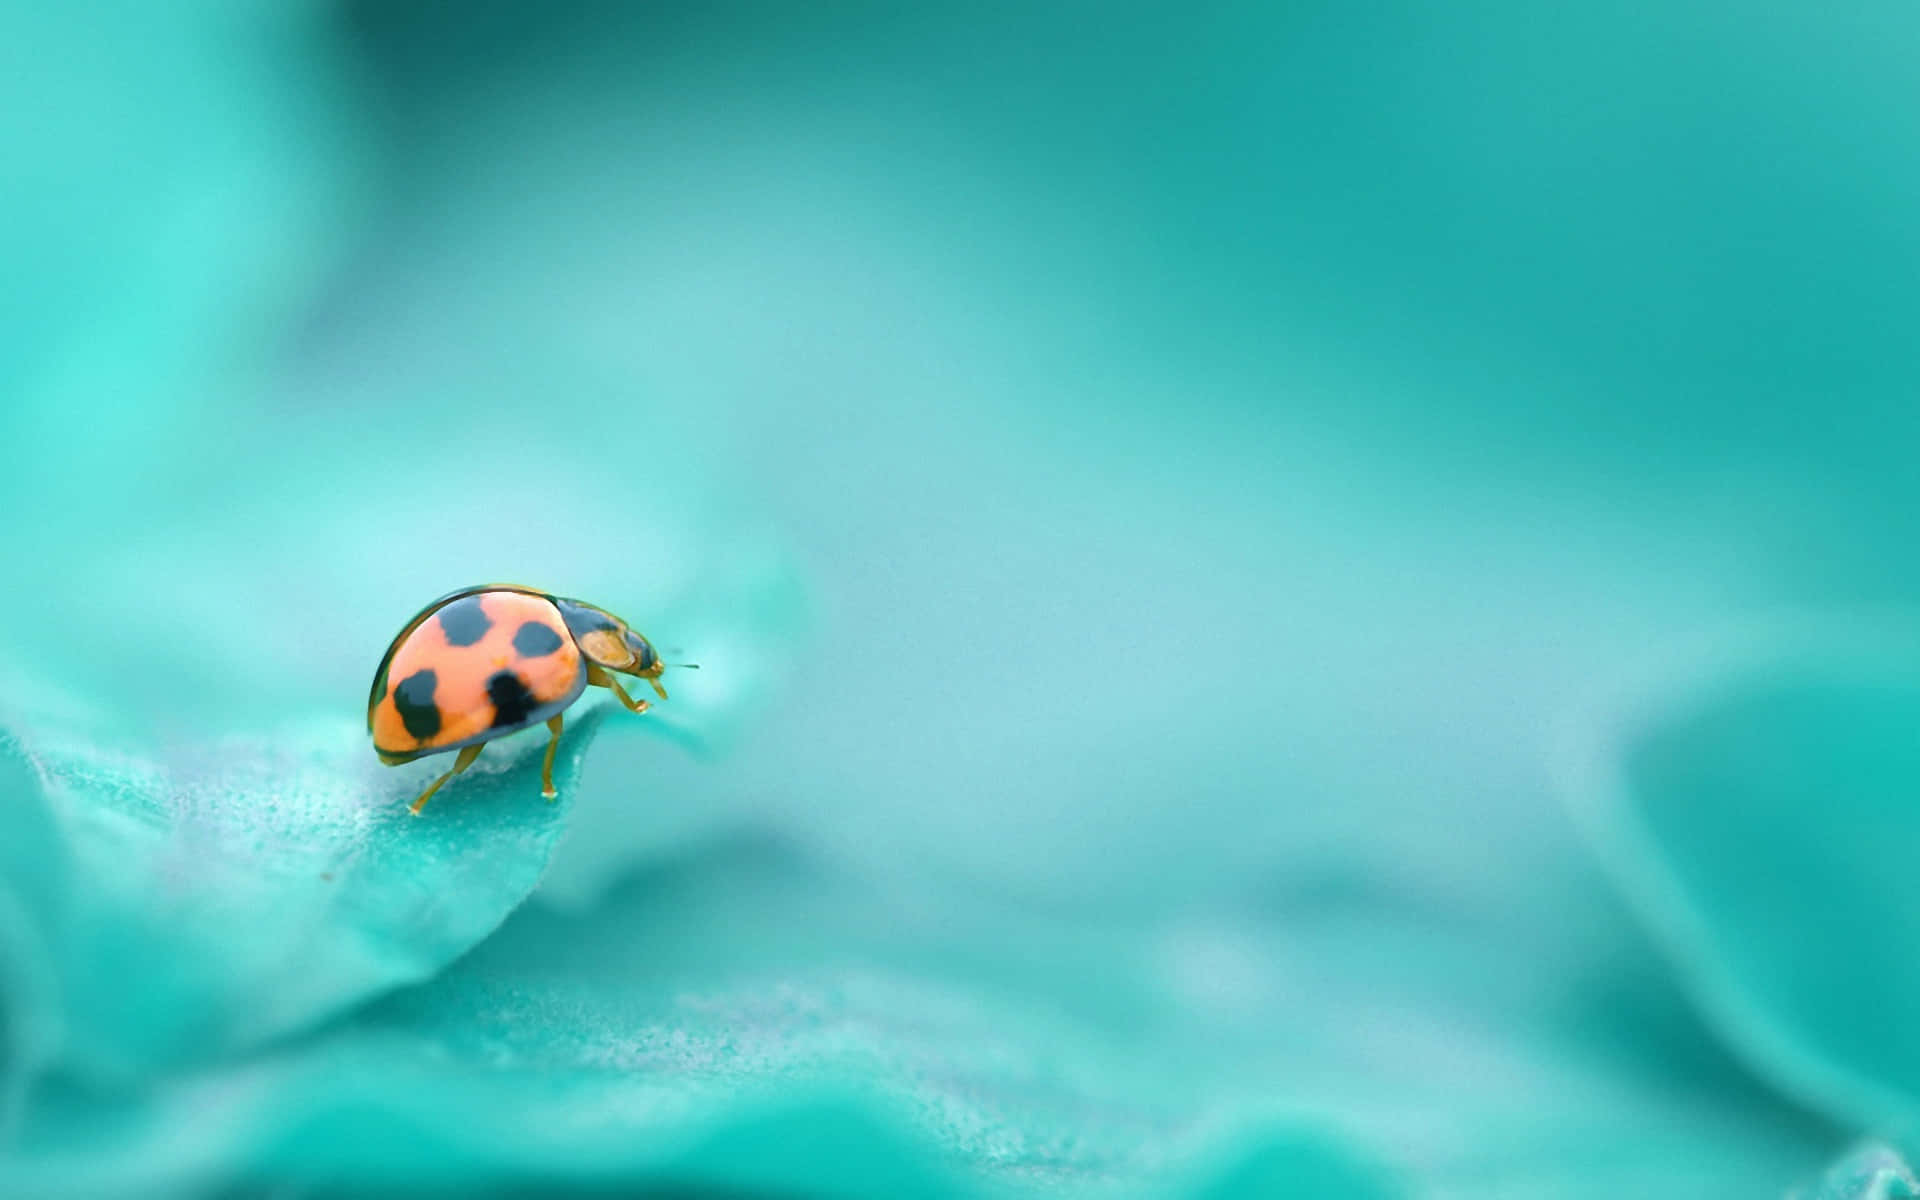 A Lone Ladybug Walking in the Wild